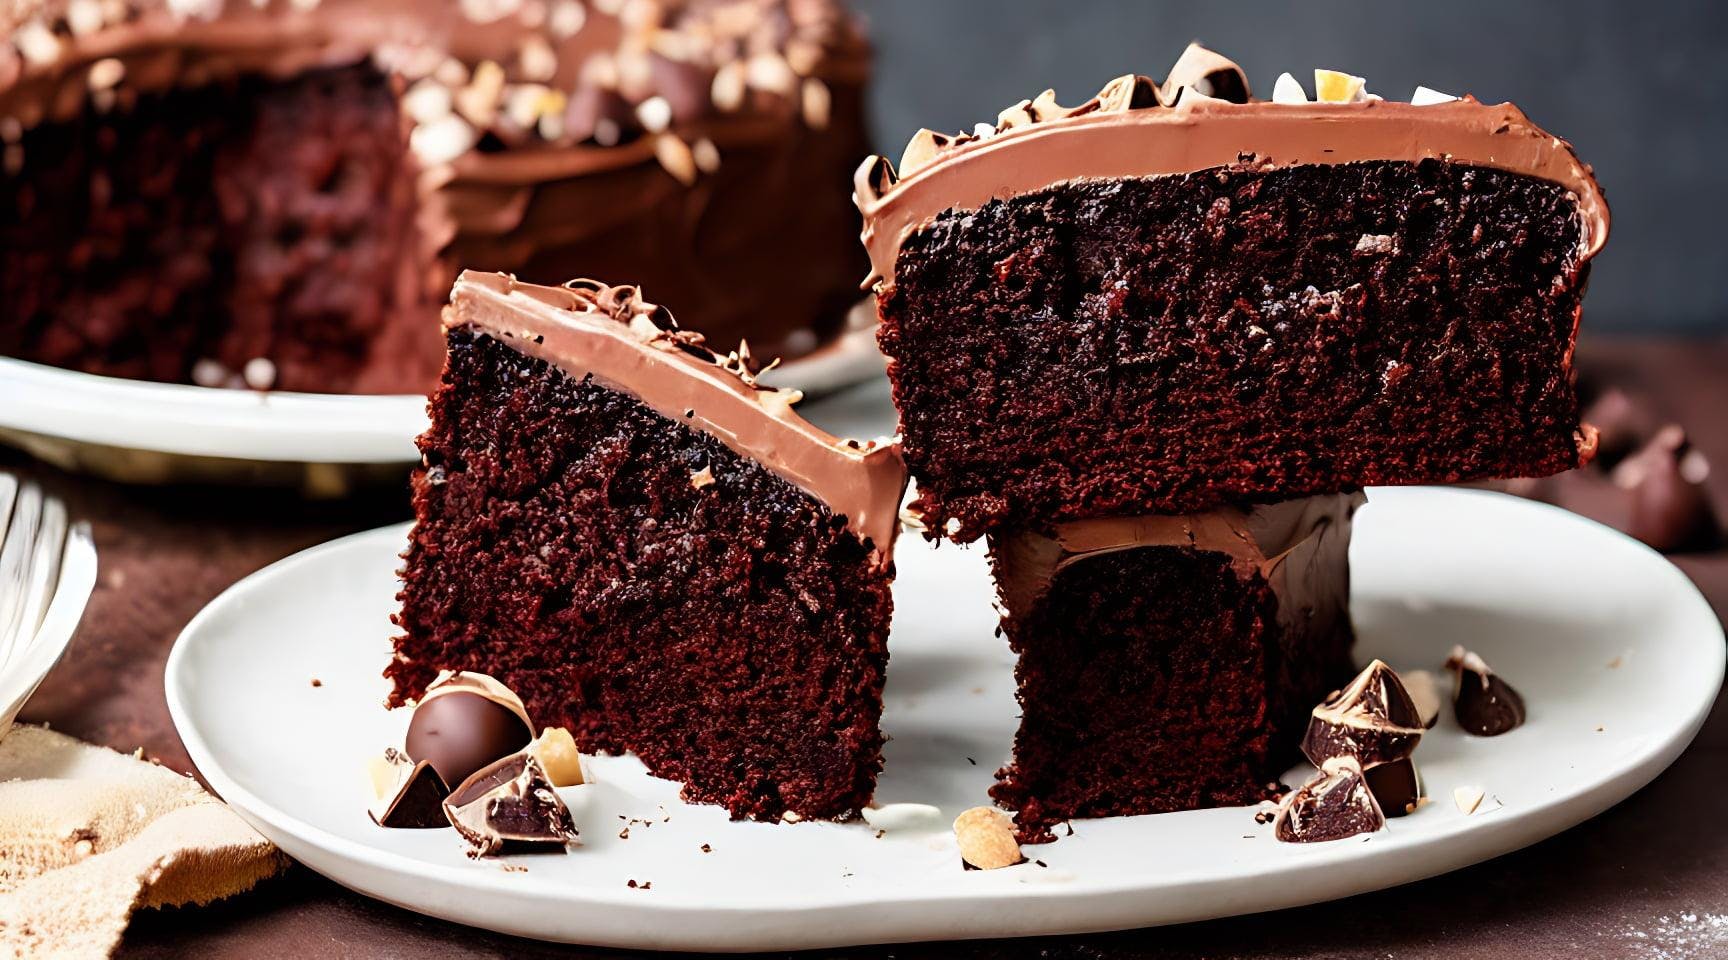 A Delicious Looking Chocolate Cake Nicely Decorated With Chunks Of Chocolate